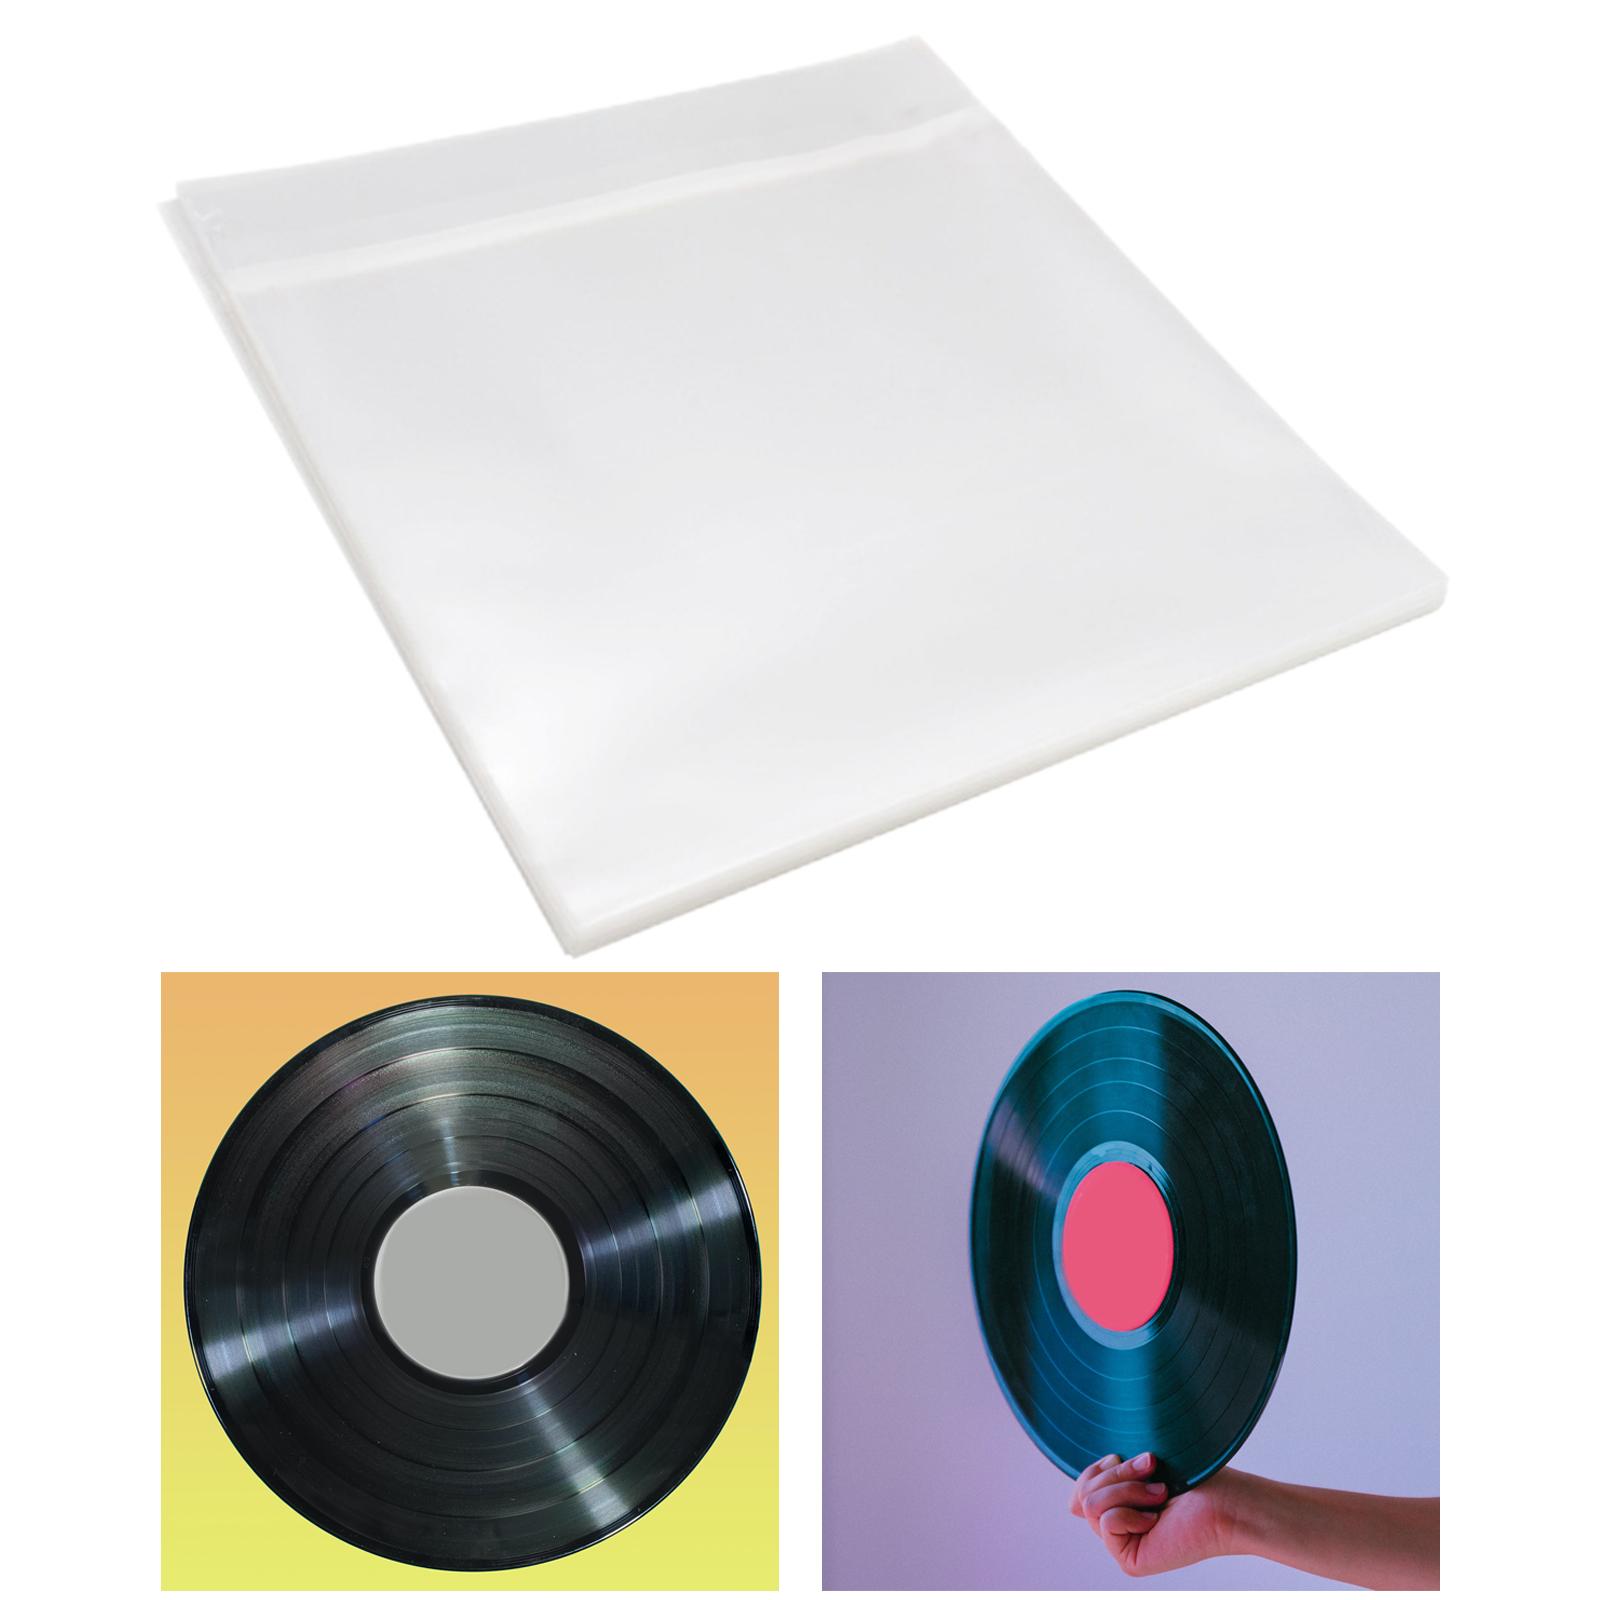 50Pcs Vinyl Record Sleeves Records Bag Reusable Clear for Turntable Player 7inch Recording